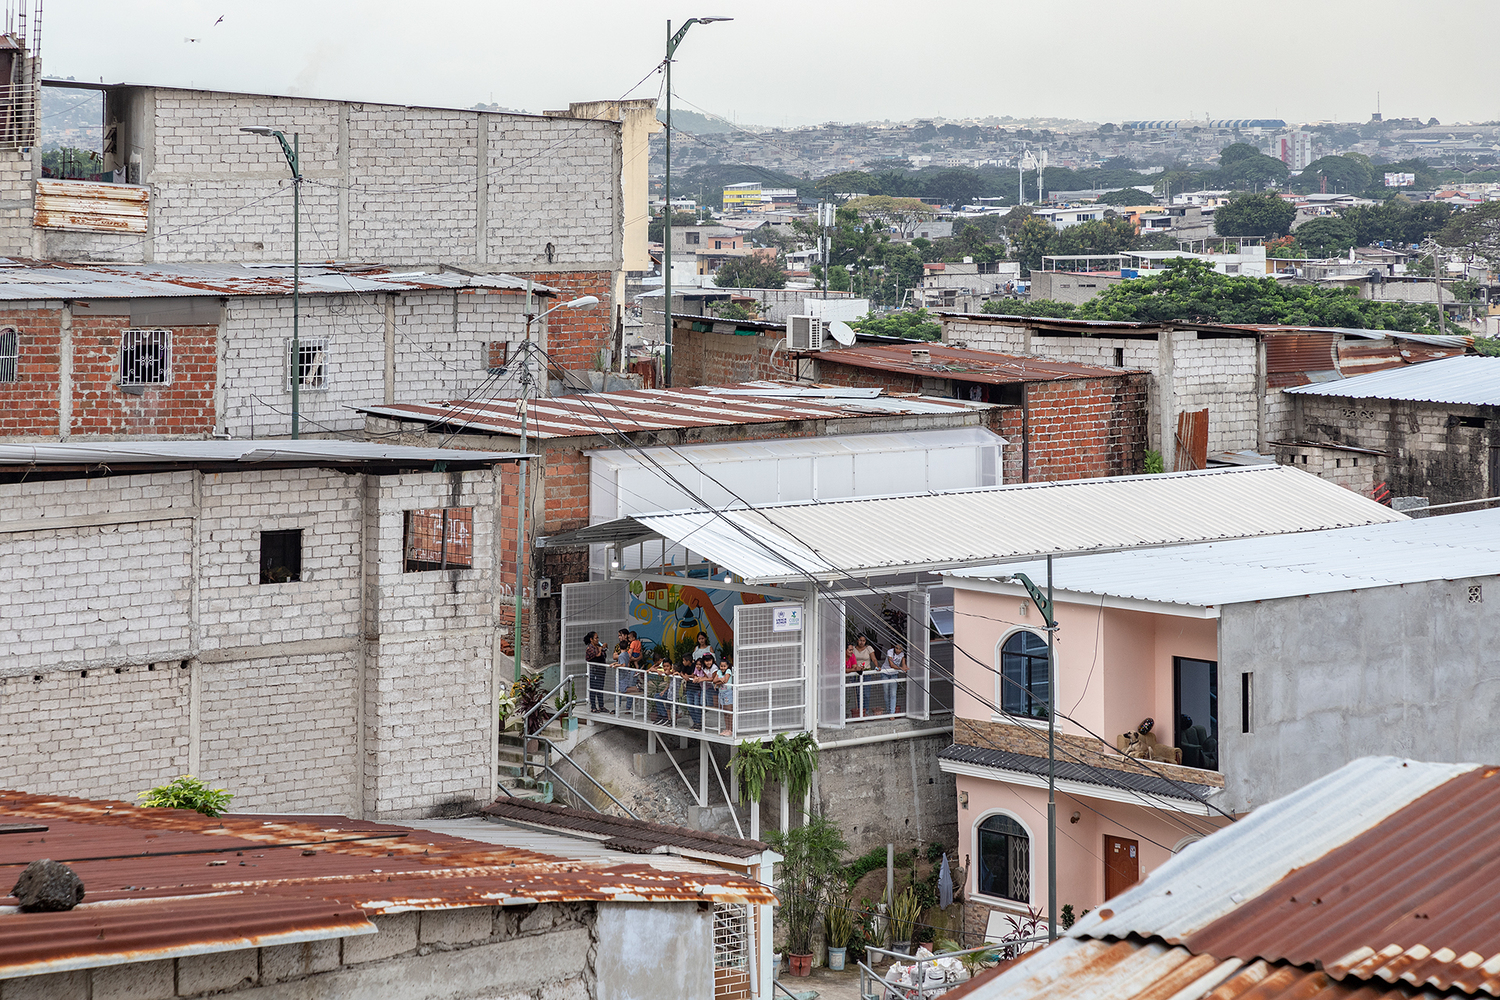 The El Faro de Mapasingue Communal House project is located on the outskirts of Guayaquil City, Ecuador